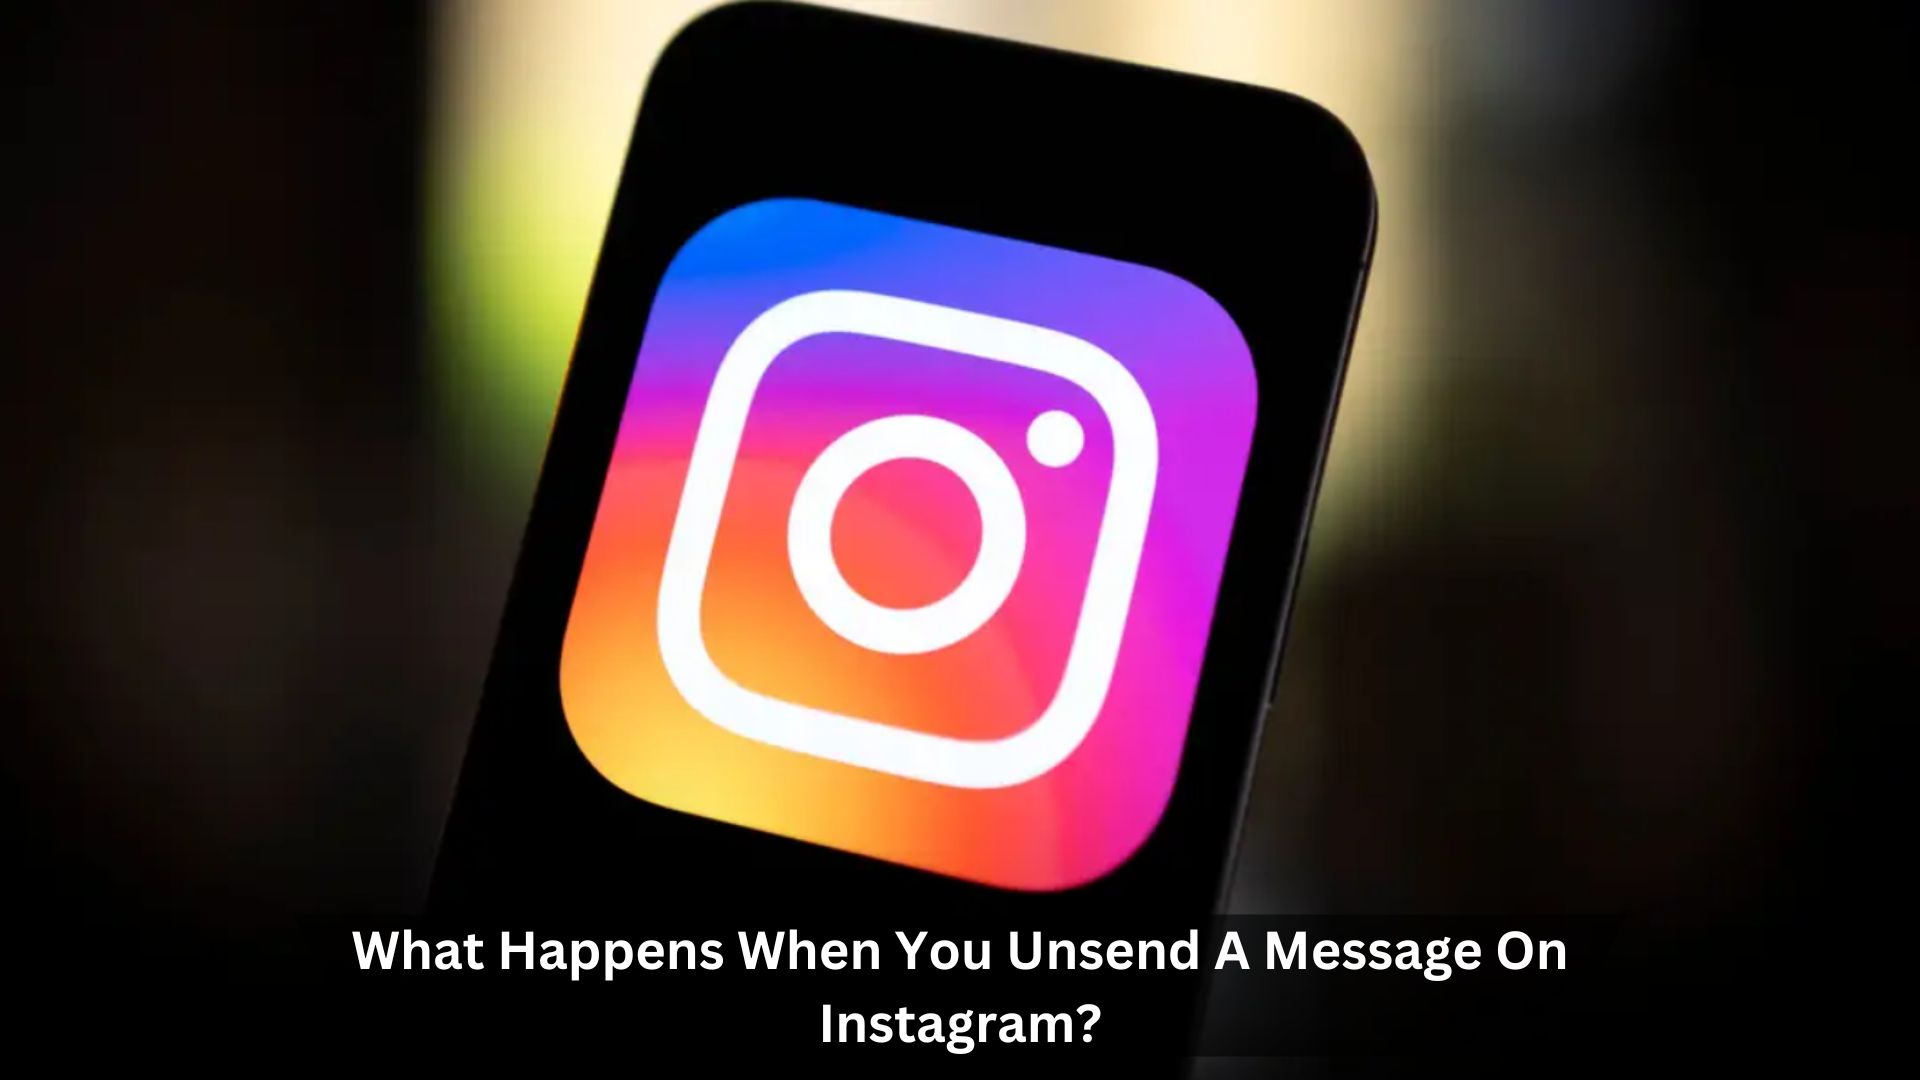 What-Happens-When-You-Unsend-A-Message-On-Instagram